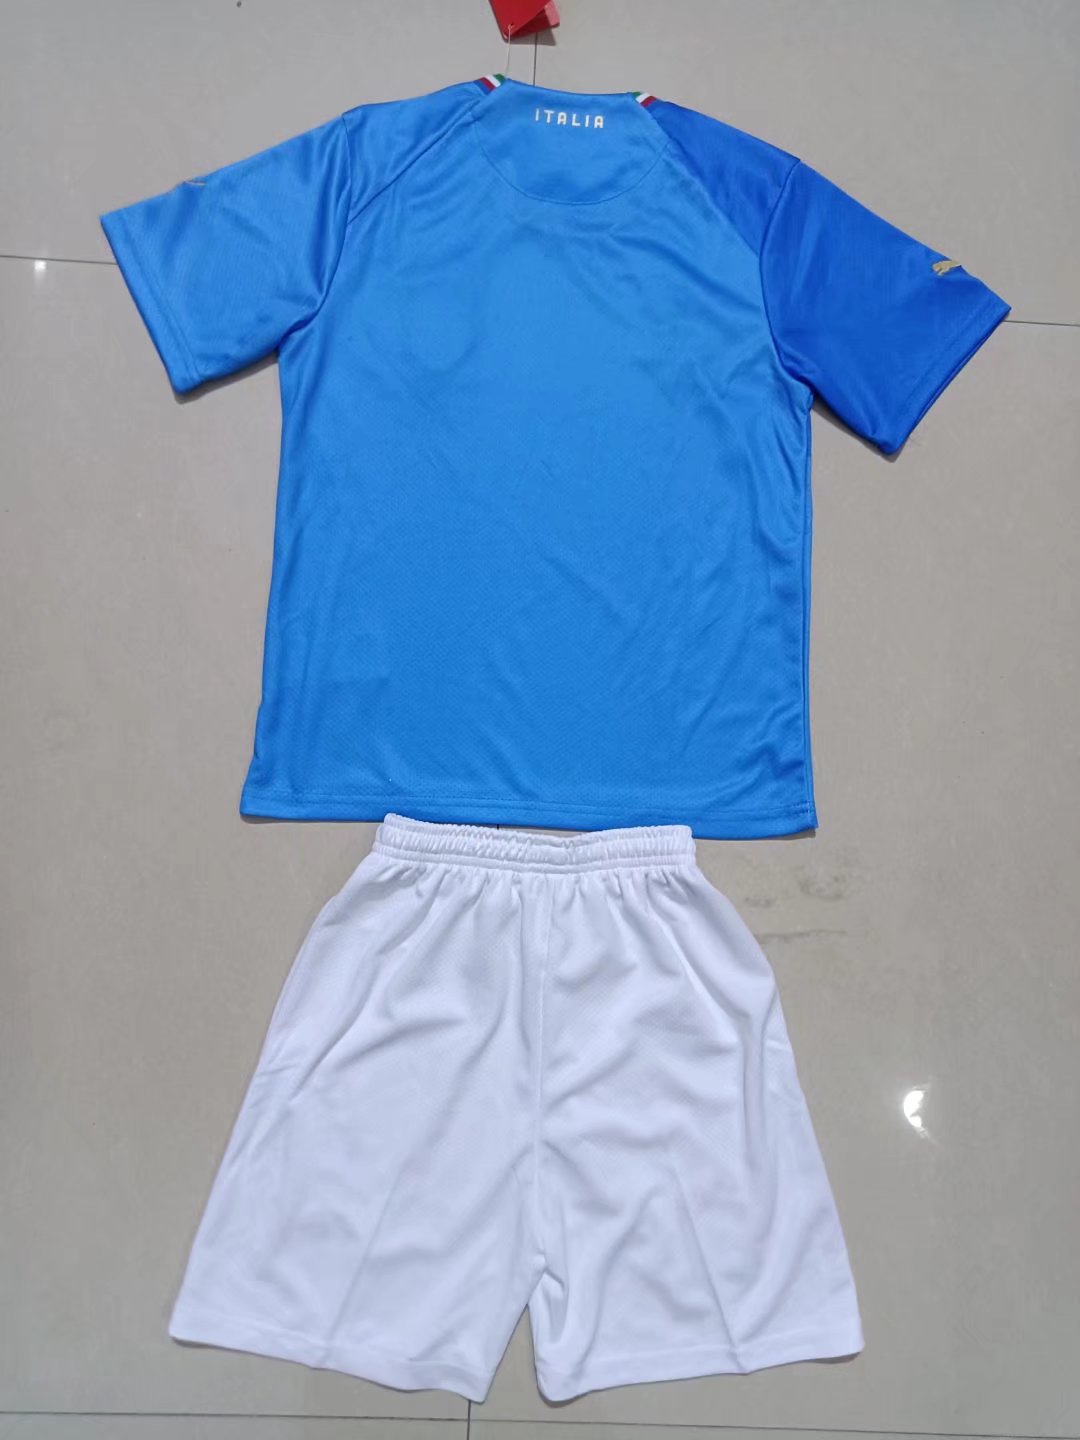 2022-23 Italy Home Blue Kids/Youth Soccer Uniform-507